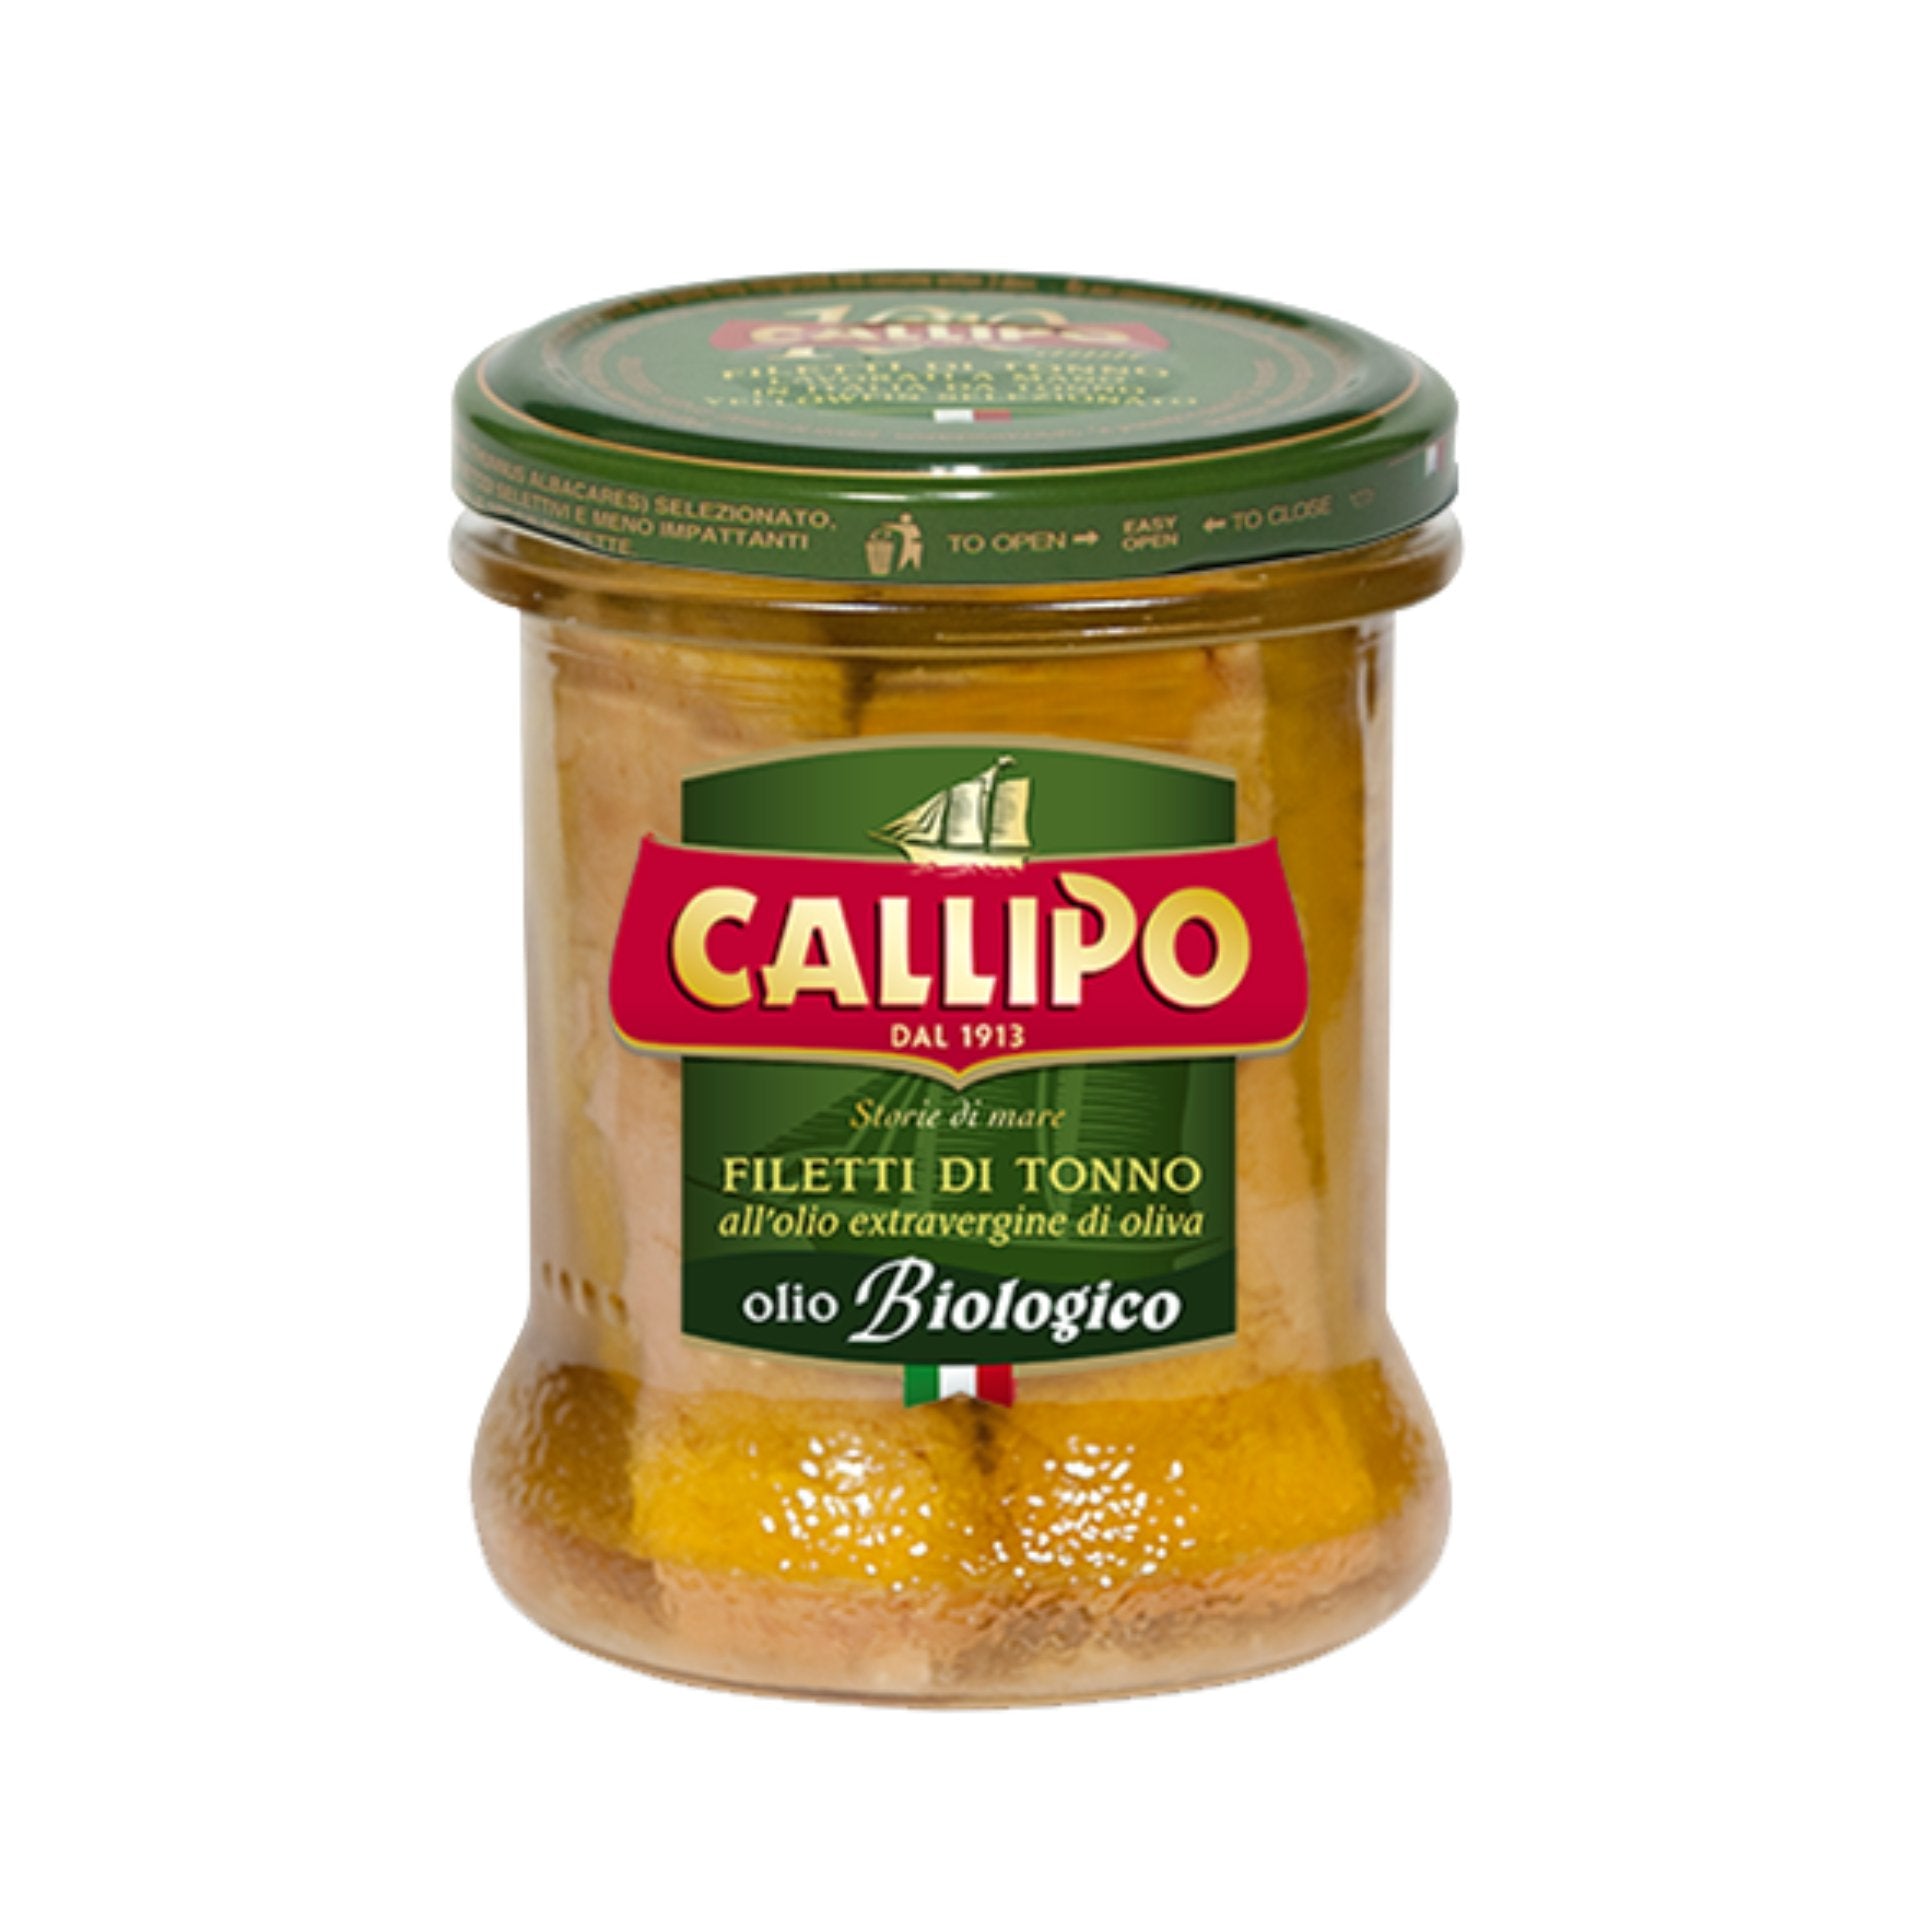 Callipo Hand Packed Yellowfin Tuna Fillets in Organic Olive Oil (Glass Jar) 170g  | Imported and distributed in the UK by Just Gourmet Foods